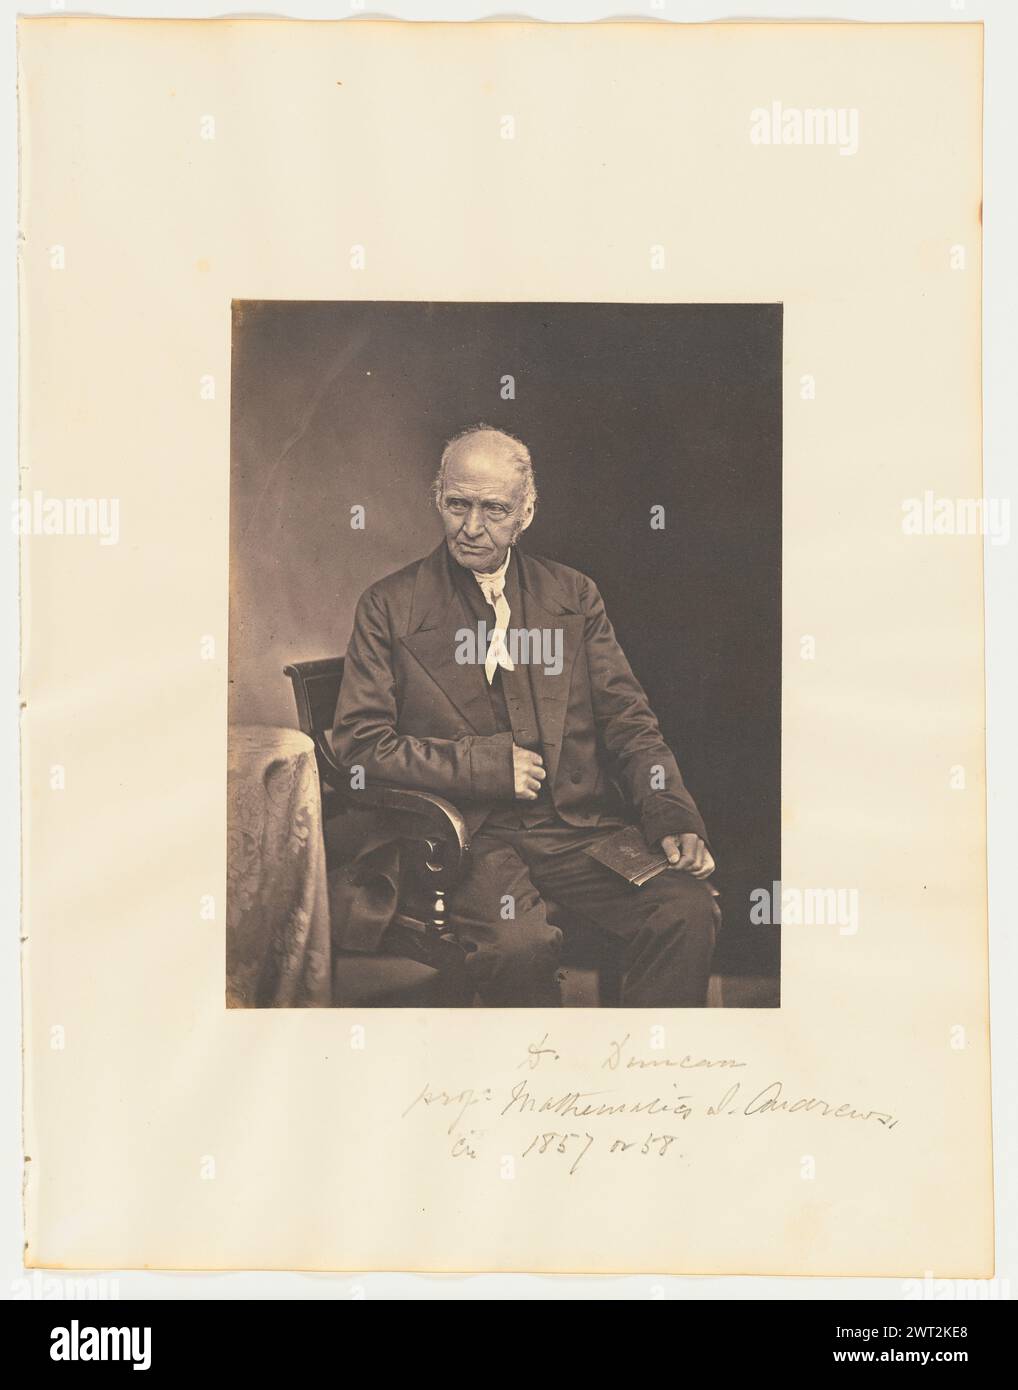 T. Duncan, Professor, Mathematics, St. Andrews. Thomas Rodger, photographer (Scottish, 1832 - 1883) about 1857–1858 A portrait of Professor Thomas Duncan, seated and holding an open book in his lap. (Recto, mount) lower right, pencil: 'T. Duncan/prof: Mathematics S. Andrews/cir 1857 or 58.'; (Verso, mount) upper right, pencil: '32'; Stock Photo